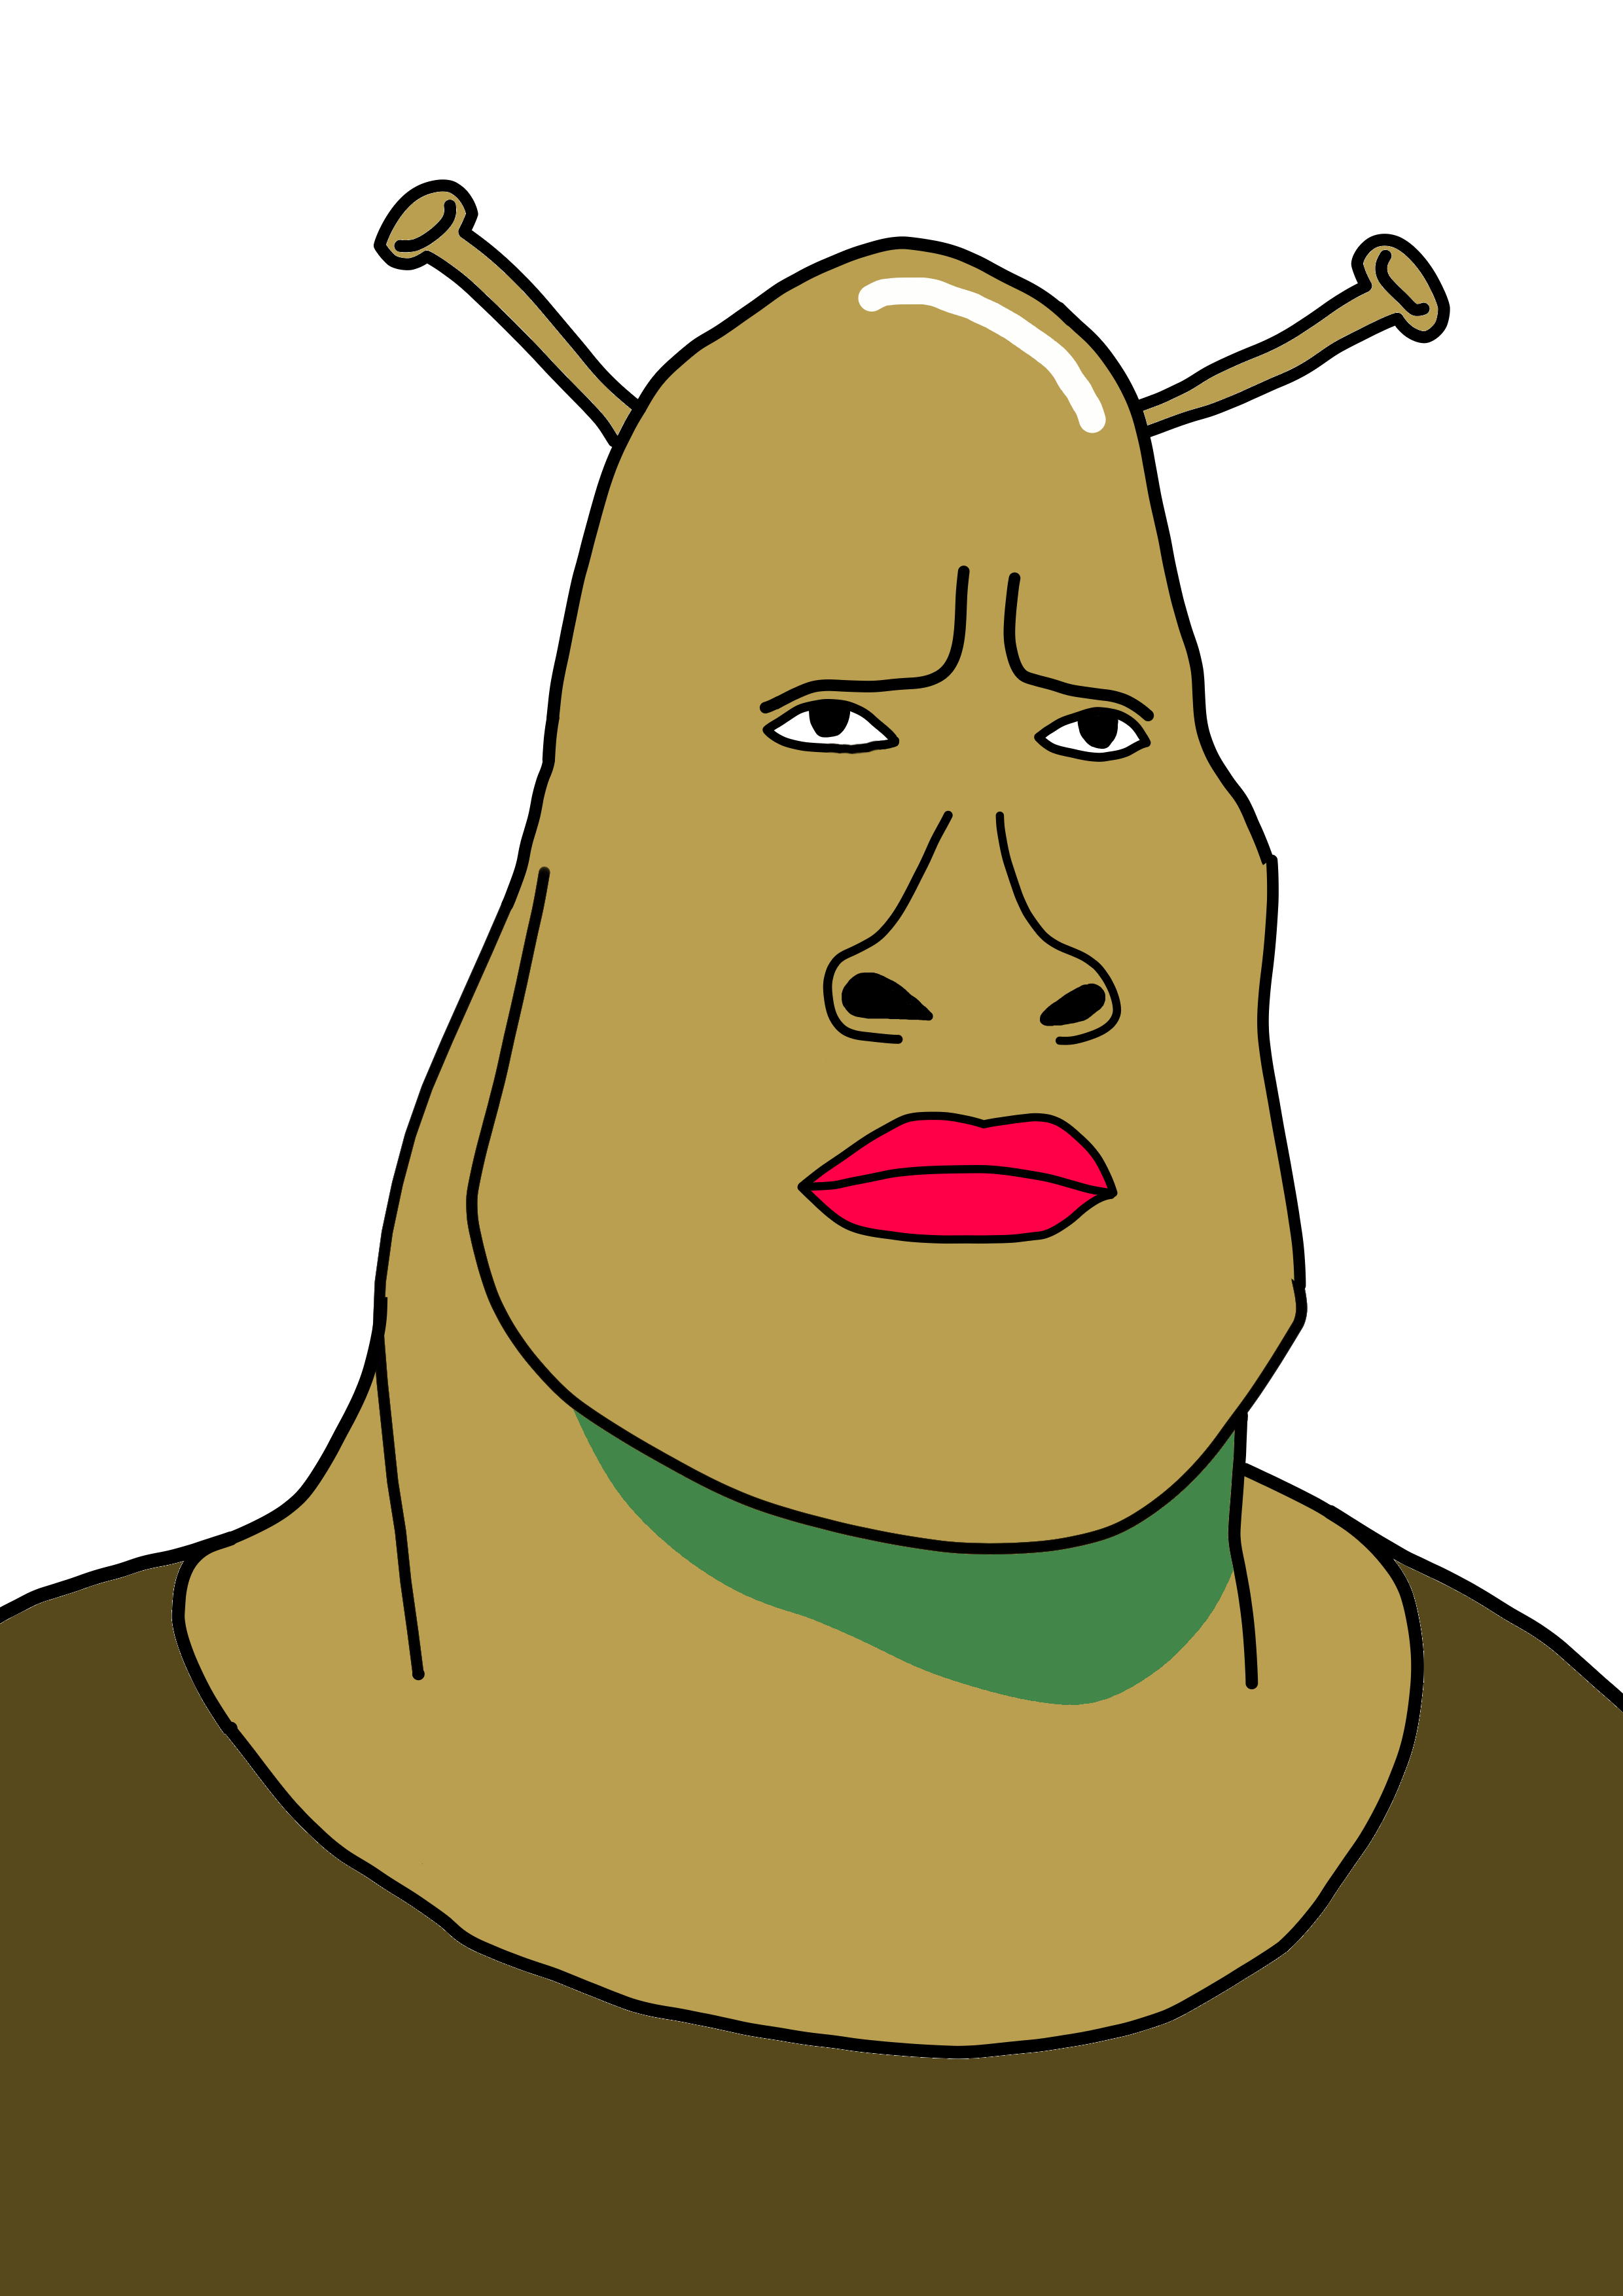 How to draw shrek from shrek with easy step by step drawing tutorial. 